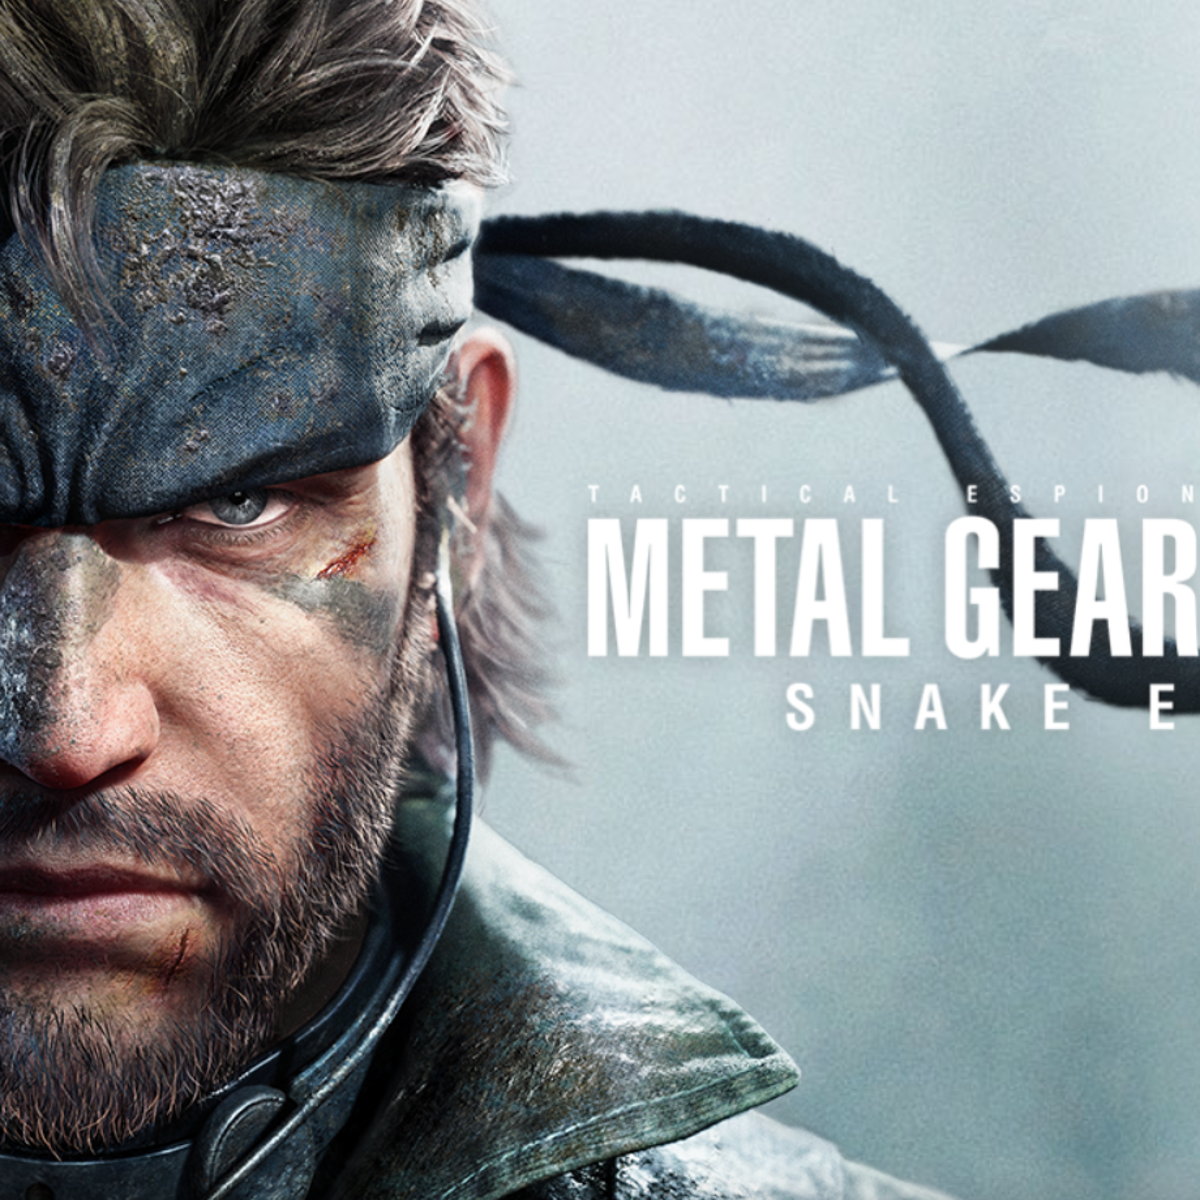 PlayStation Showcase LIVE start time - Metal Gear 3, Classic